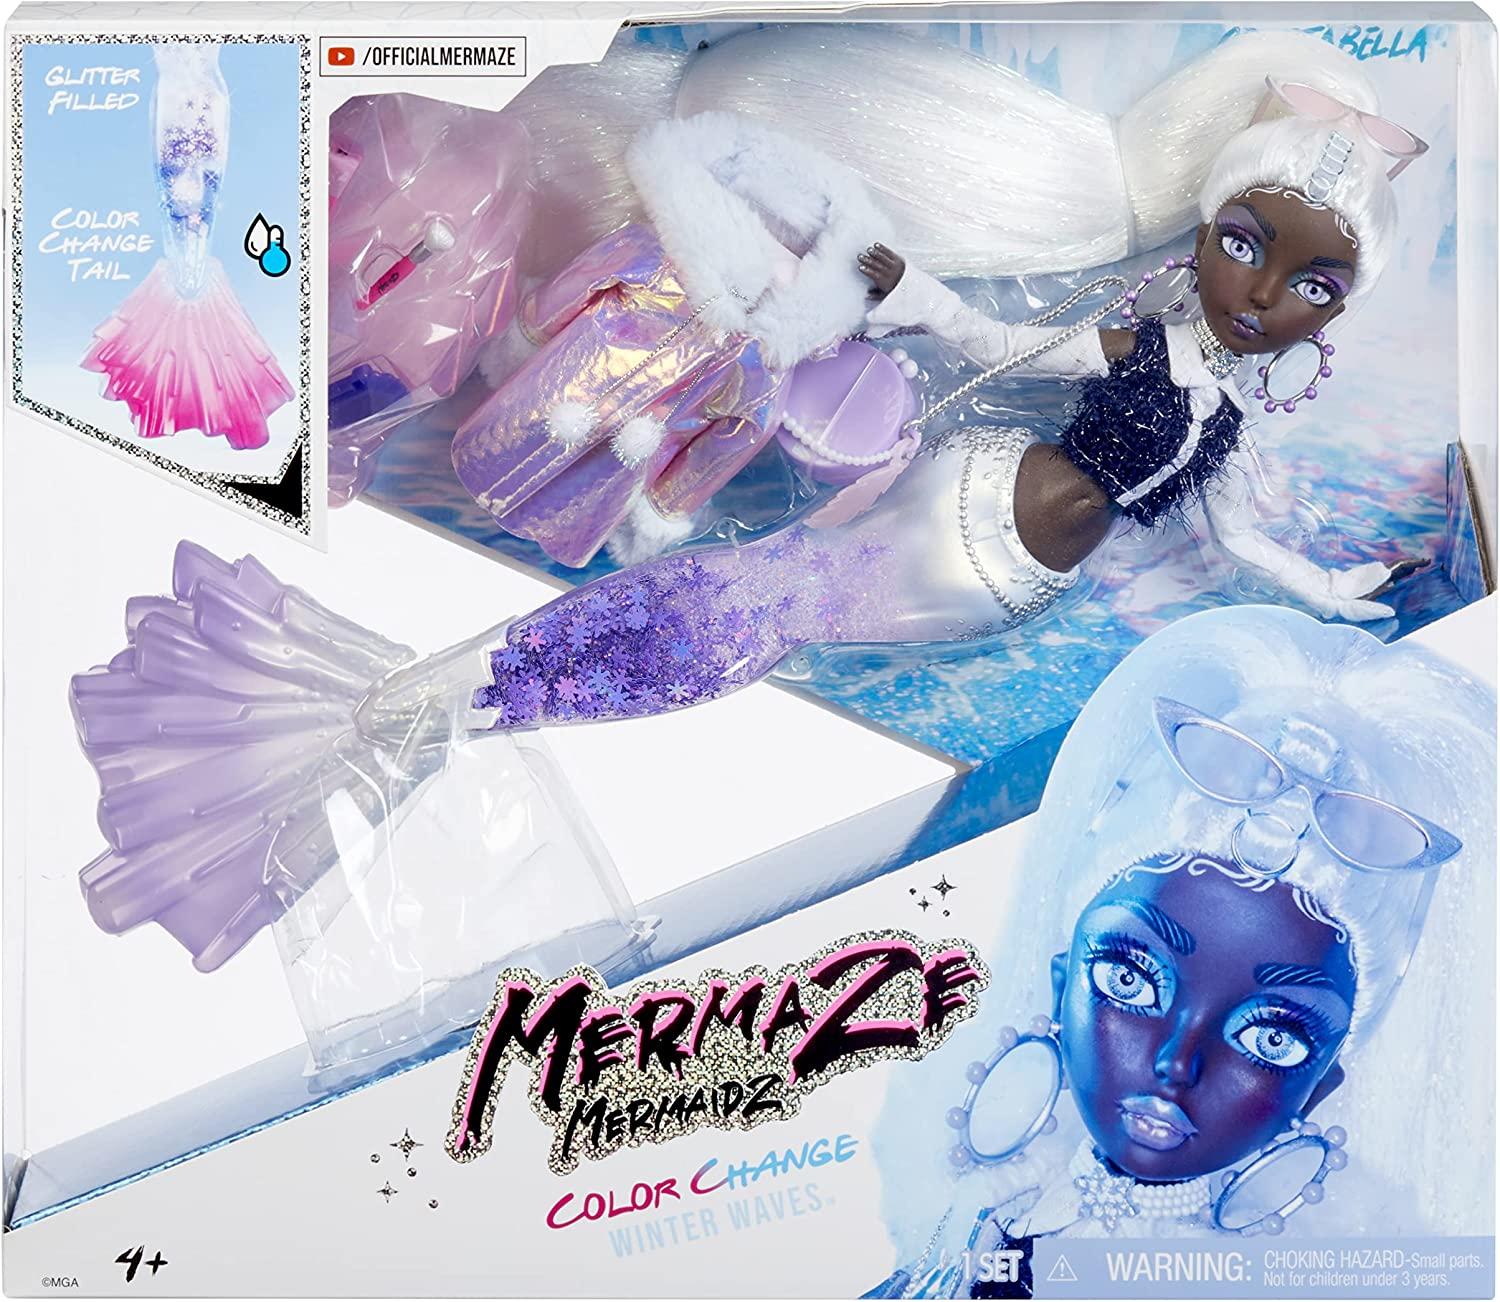 Mermaze Mermaidz™ Winter Waves Crystabella™ Mermaid Fashion Doll with Color Change Fin, Glitter-Filled Tail and Accessories